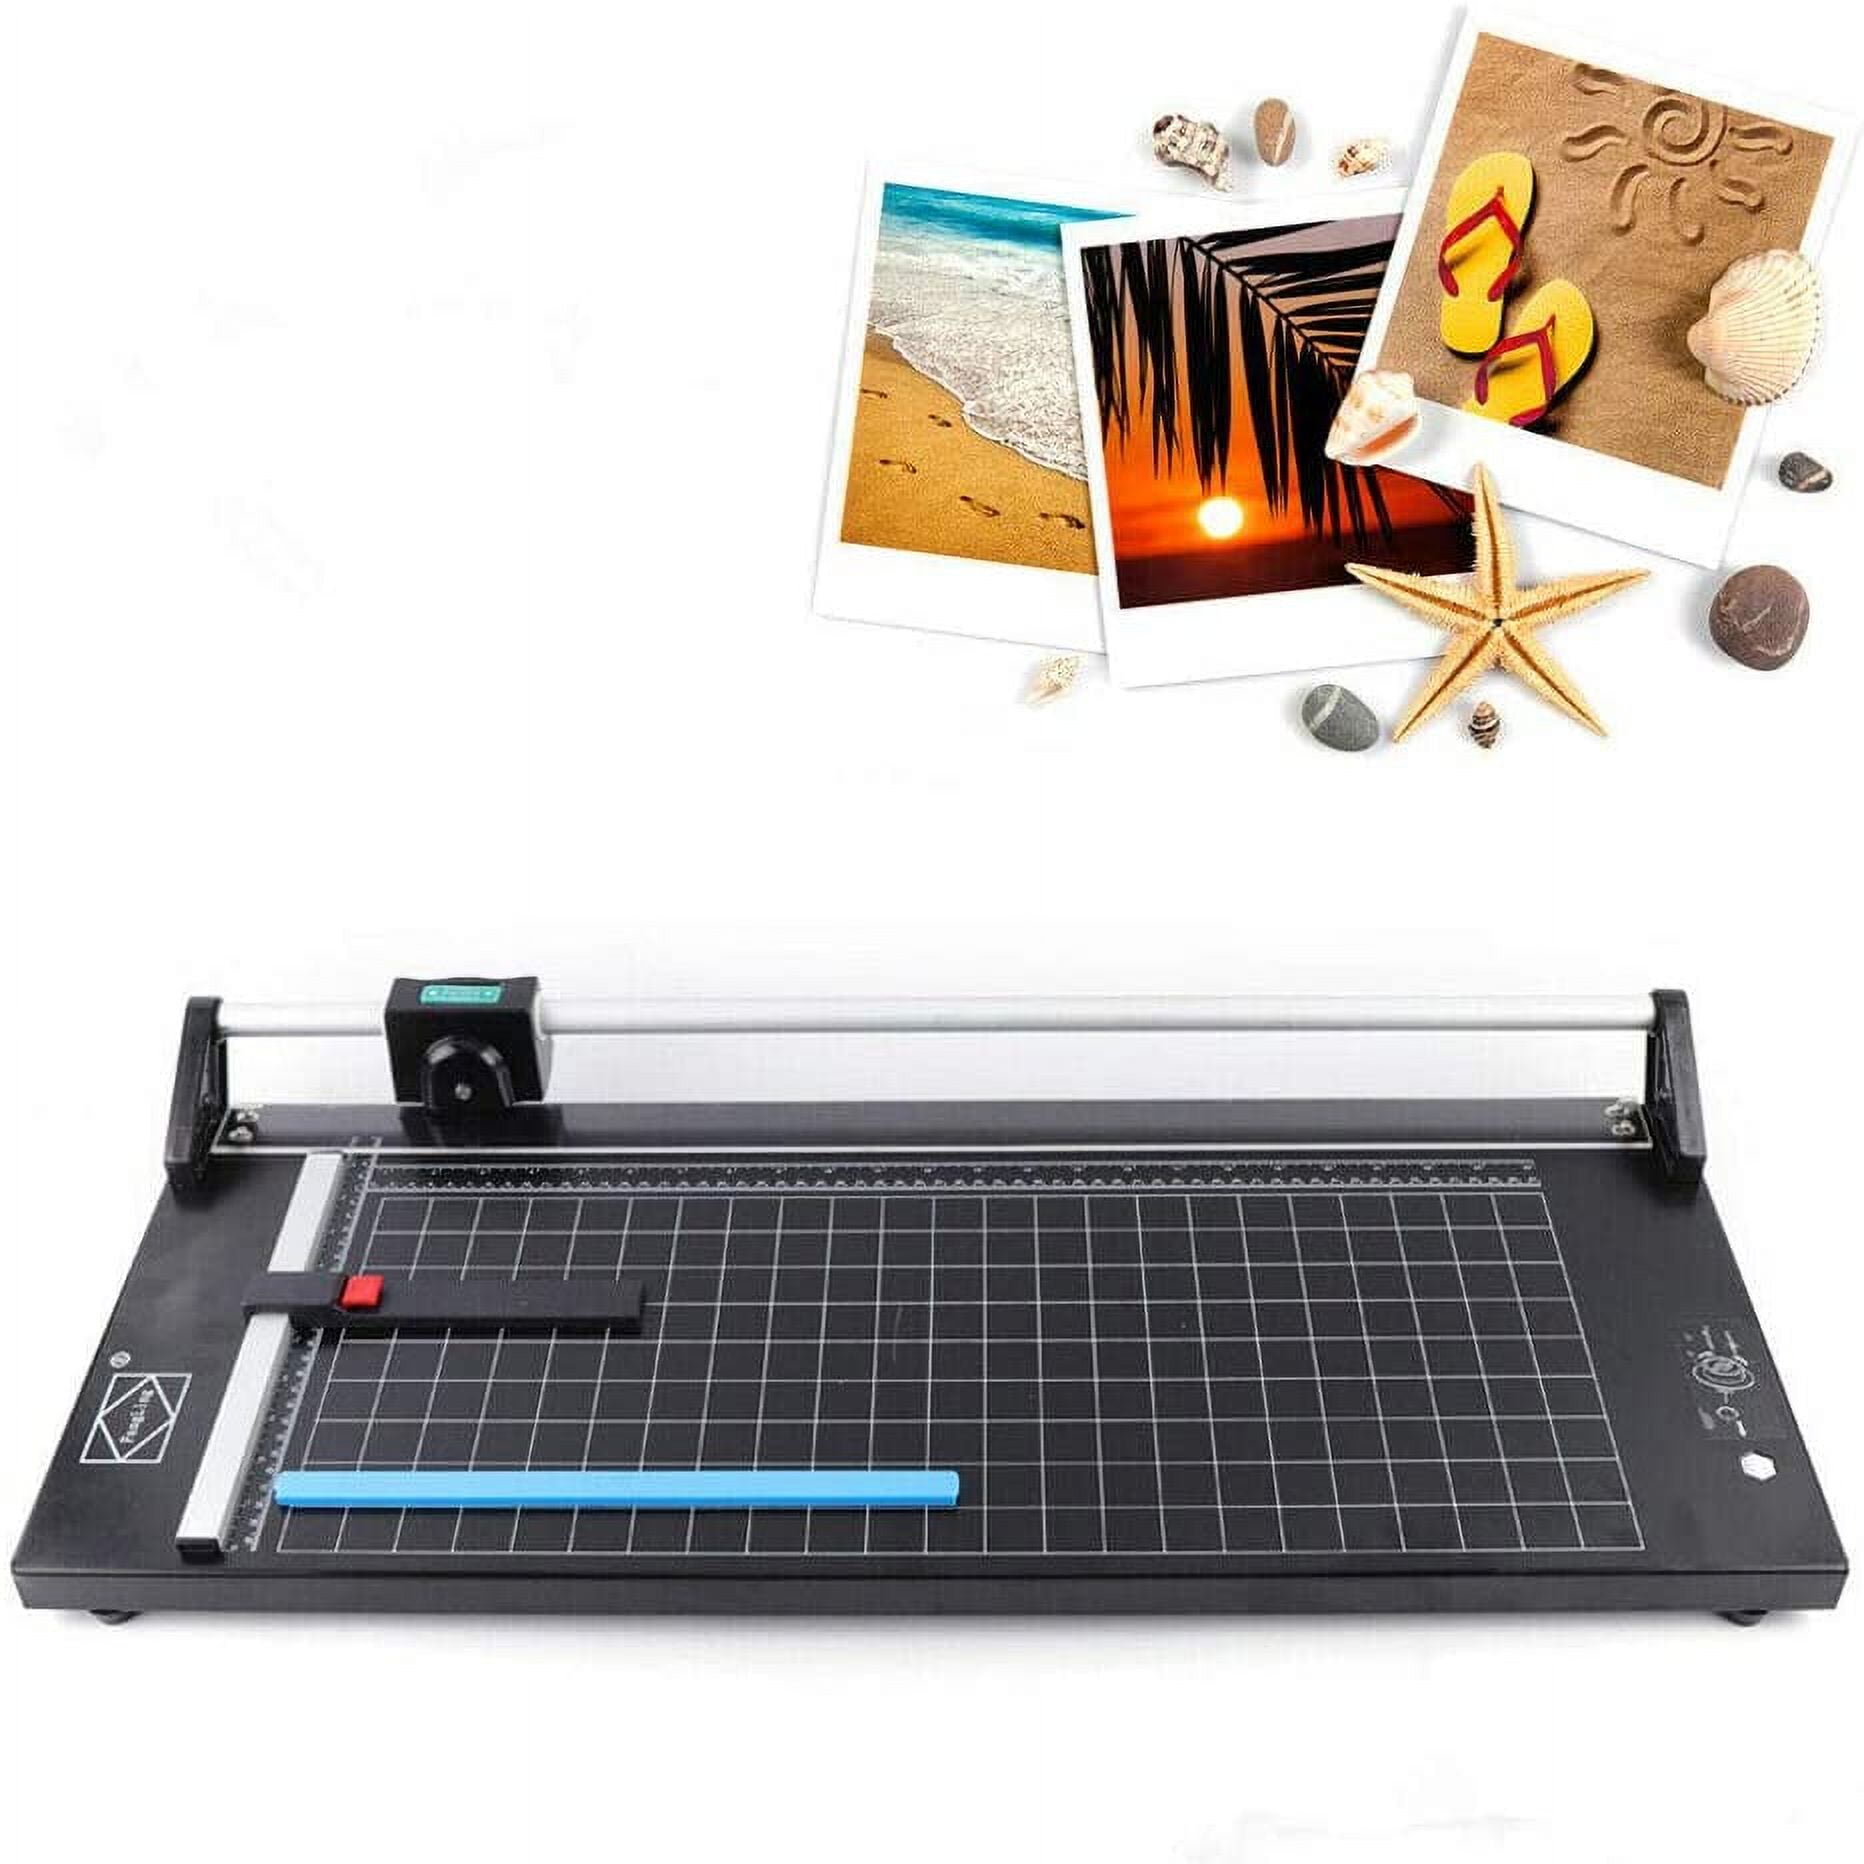 24 Inch Manual Precision Rotary Paper Trimmer, Sharp Photo Paper Cutter  With A4 PVC Self-Healing Cutting Mat $52.46